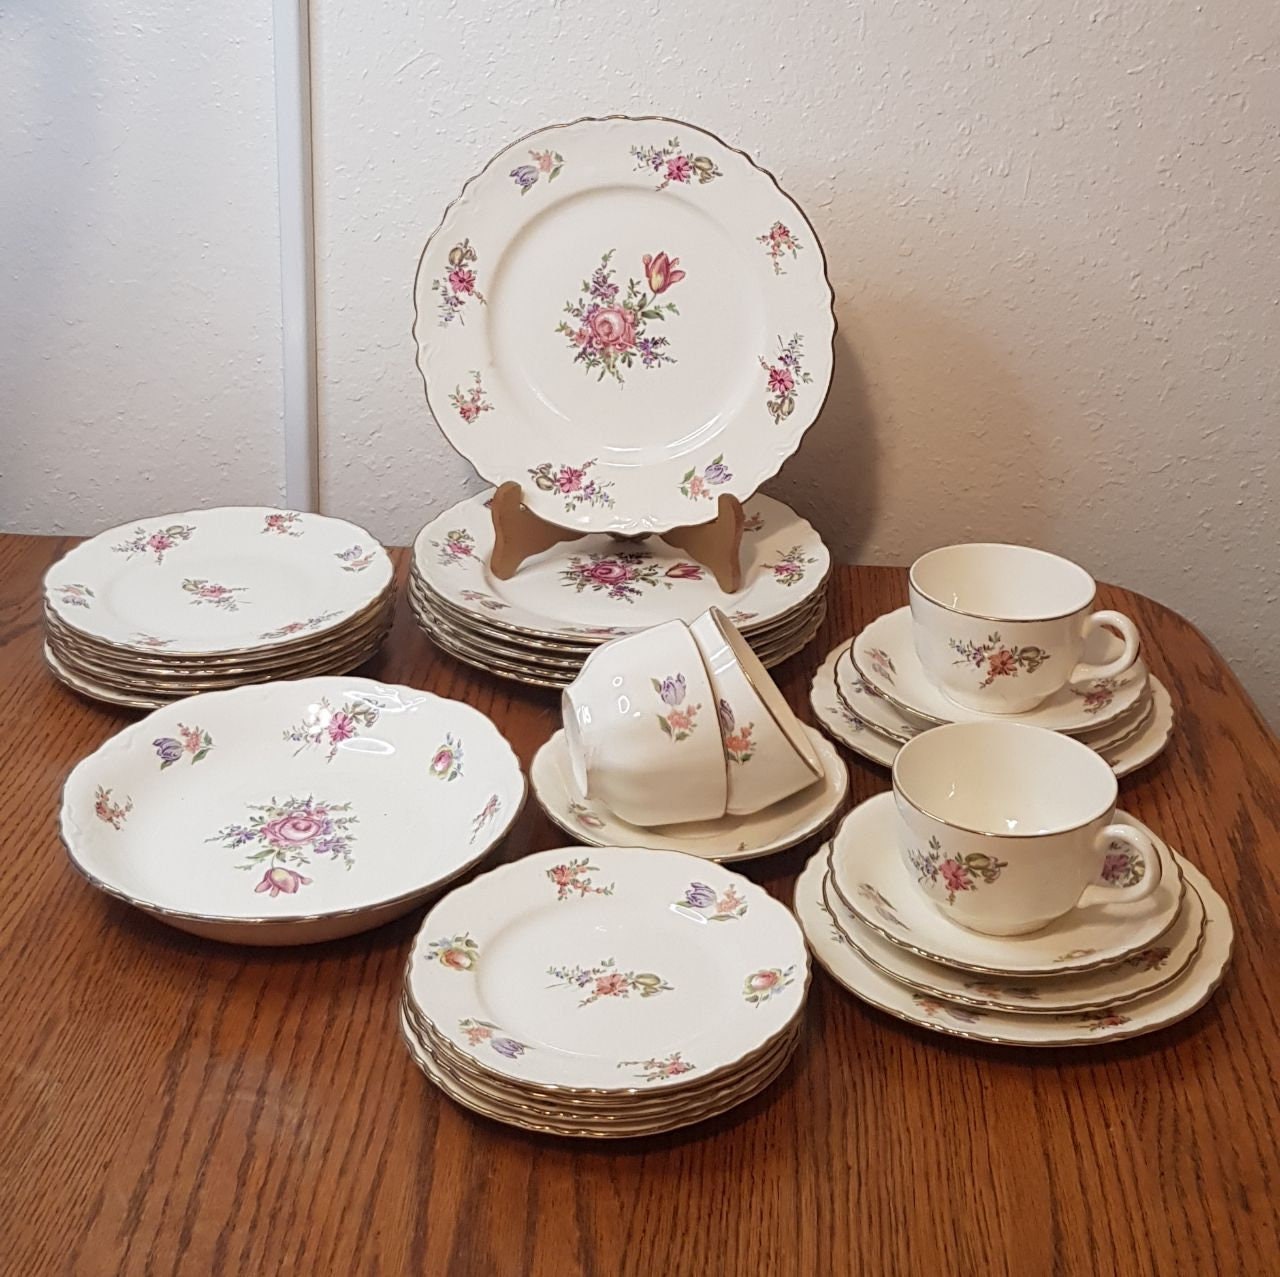 Mix and Match Vintage Dishes Homer Laughlin Skytone bluemont Pattern Pink  and White Floral Red on Black Green Branch Plates Bowls C. 1950s 